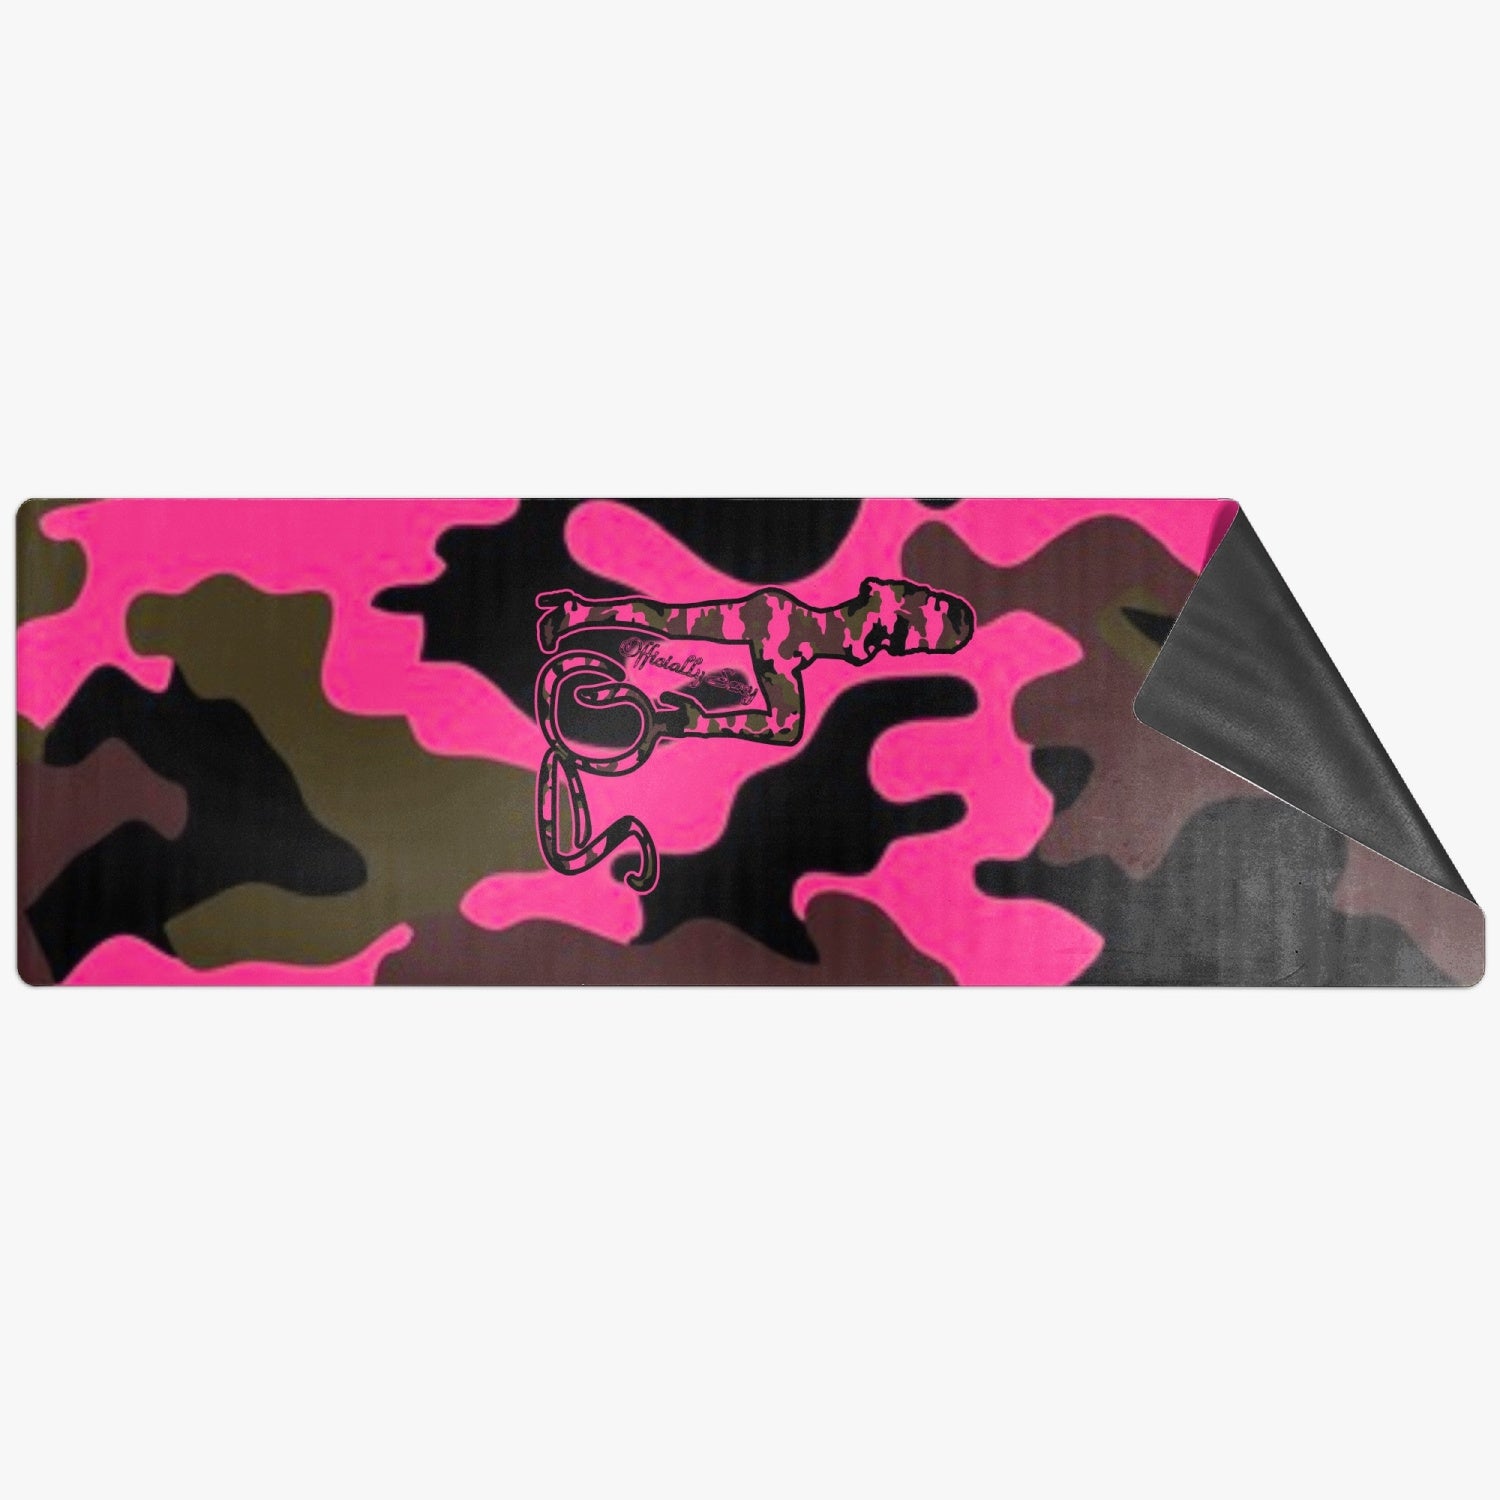 Officially Sexy Pink Army Camouflage Collection Suede Anti-slip Yoga Mat 2